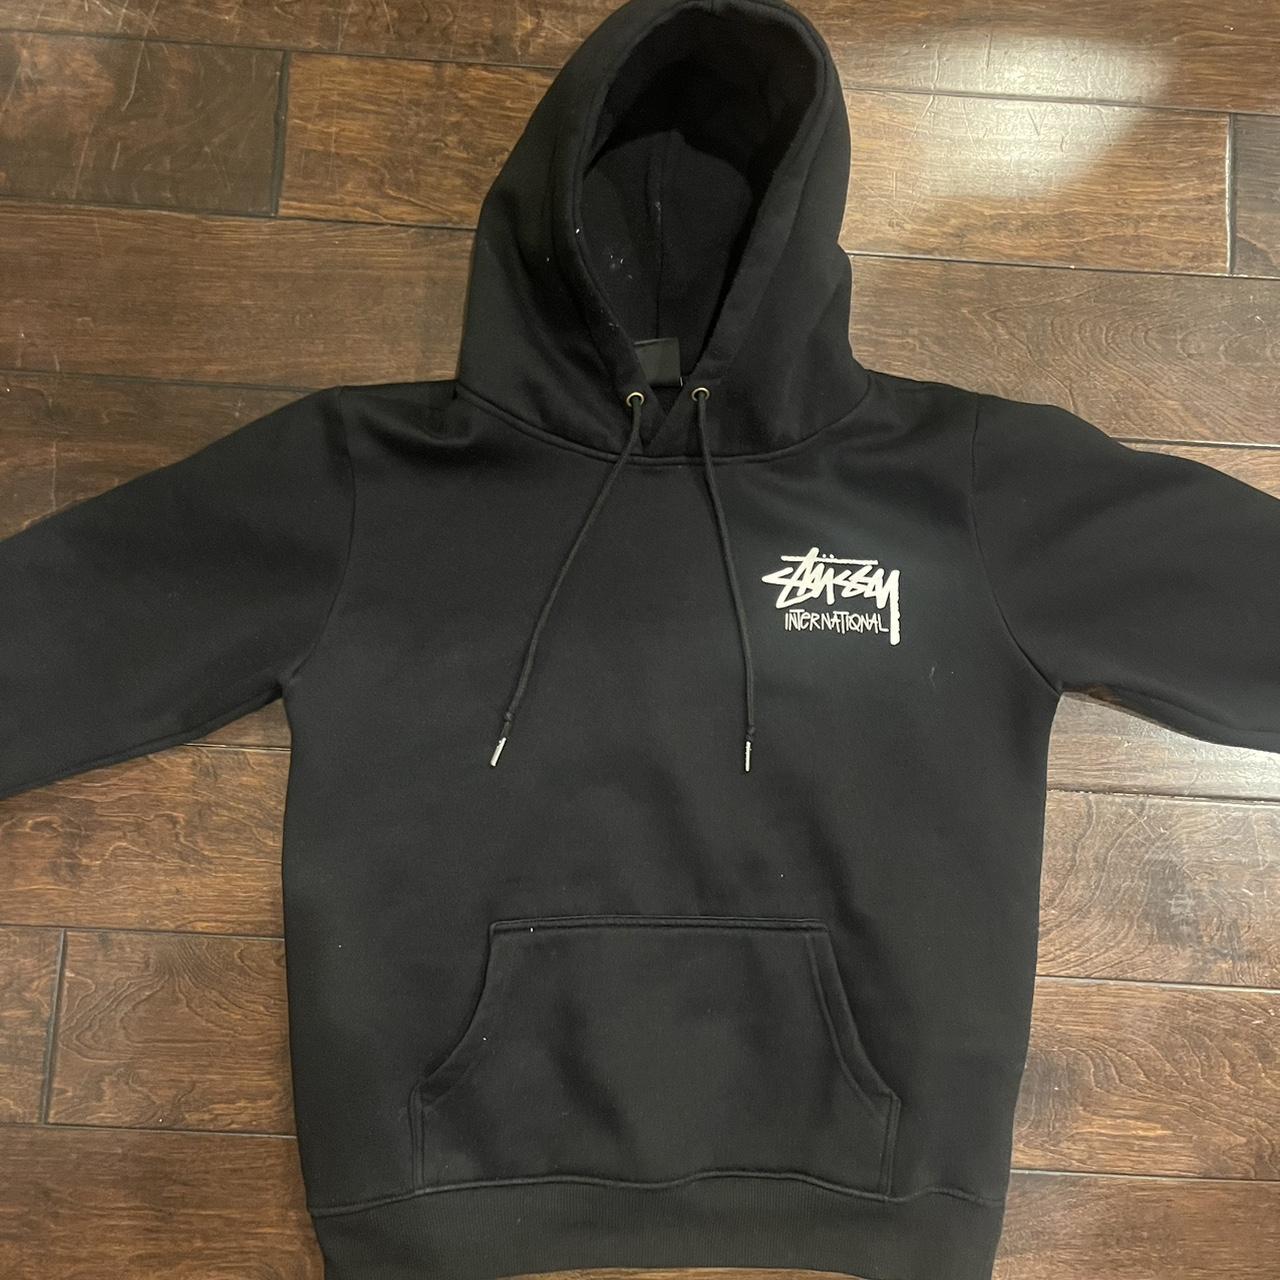 Stussy International Hoodie No size listed but fits... - Depop